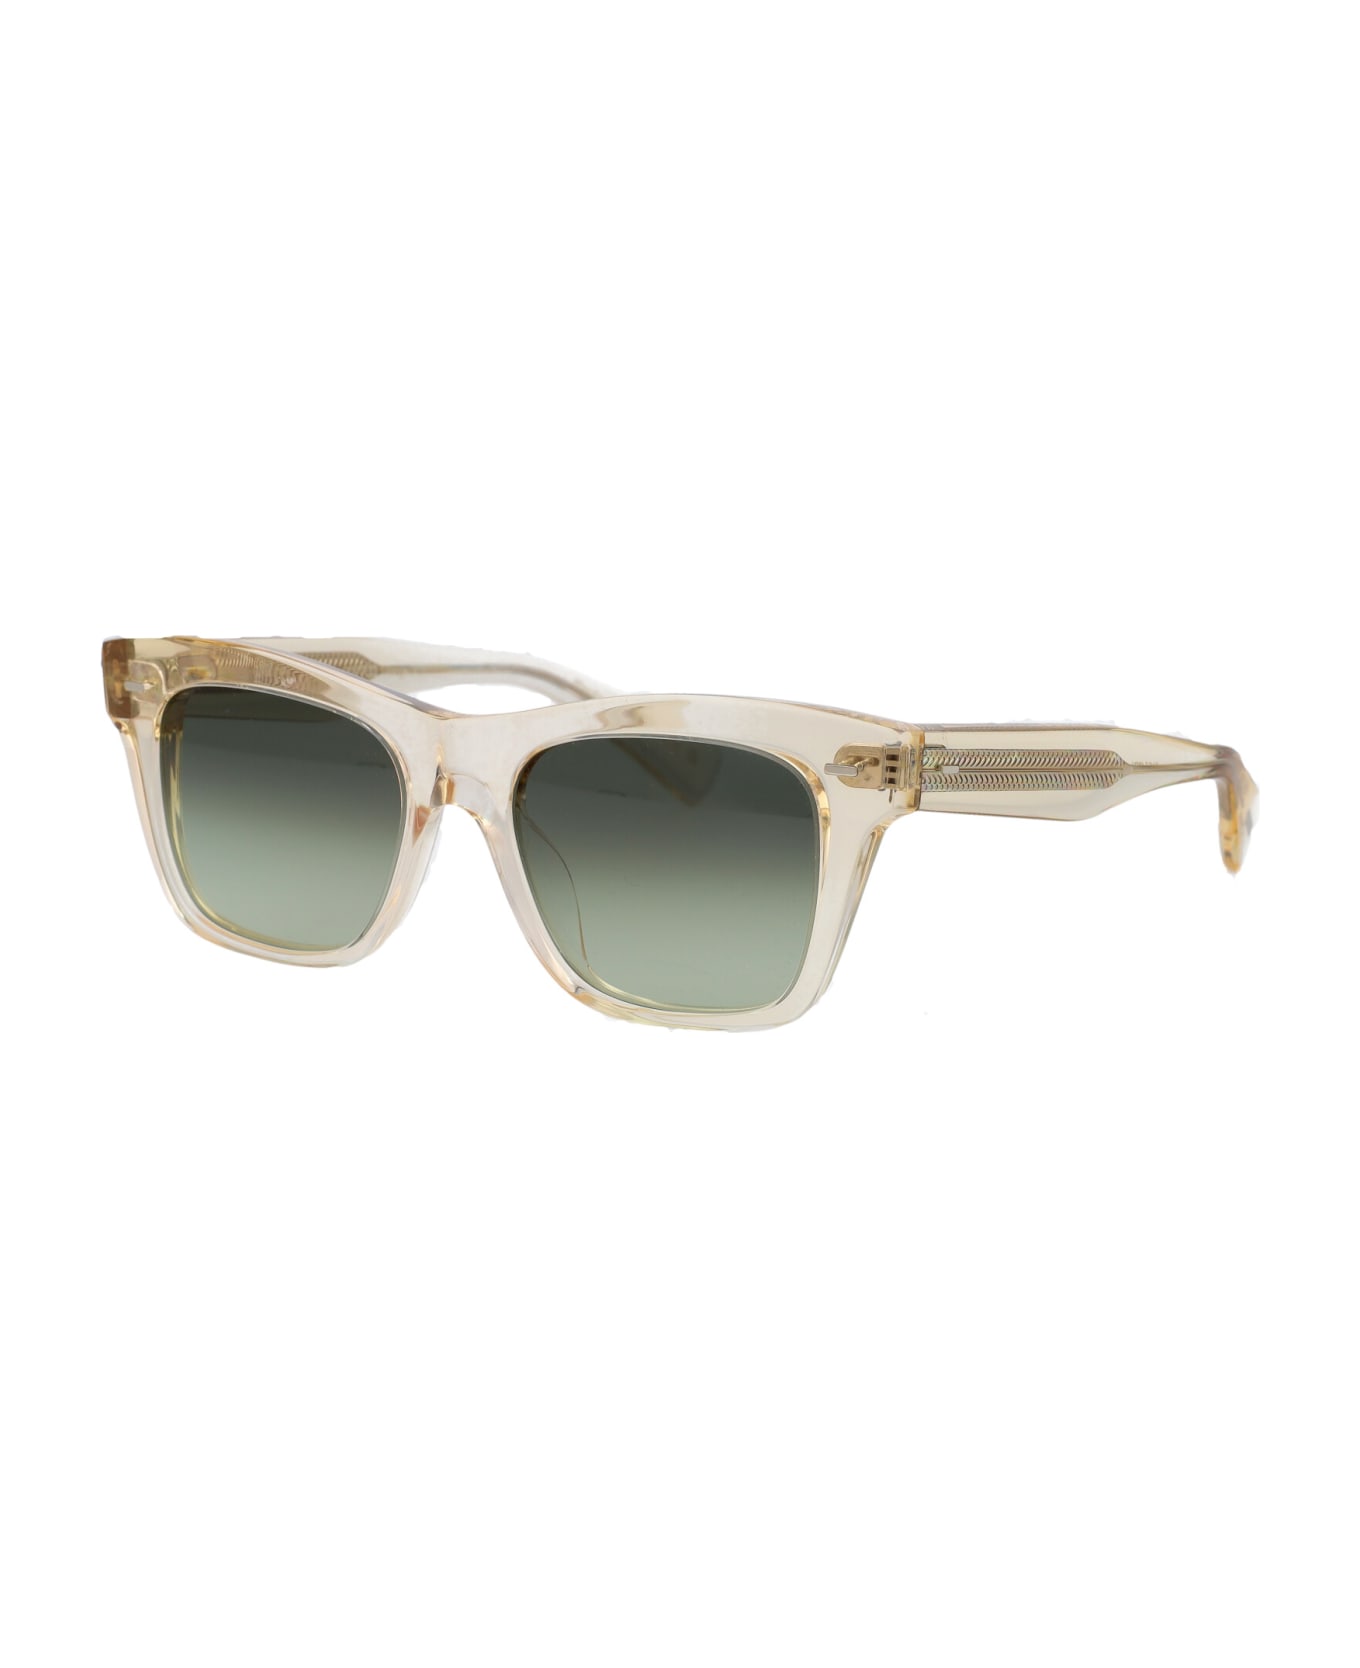 Oliver Peoples Ms. Oliver Sunglasses - 1094BH Buff サングラス